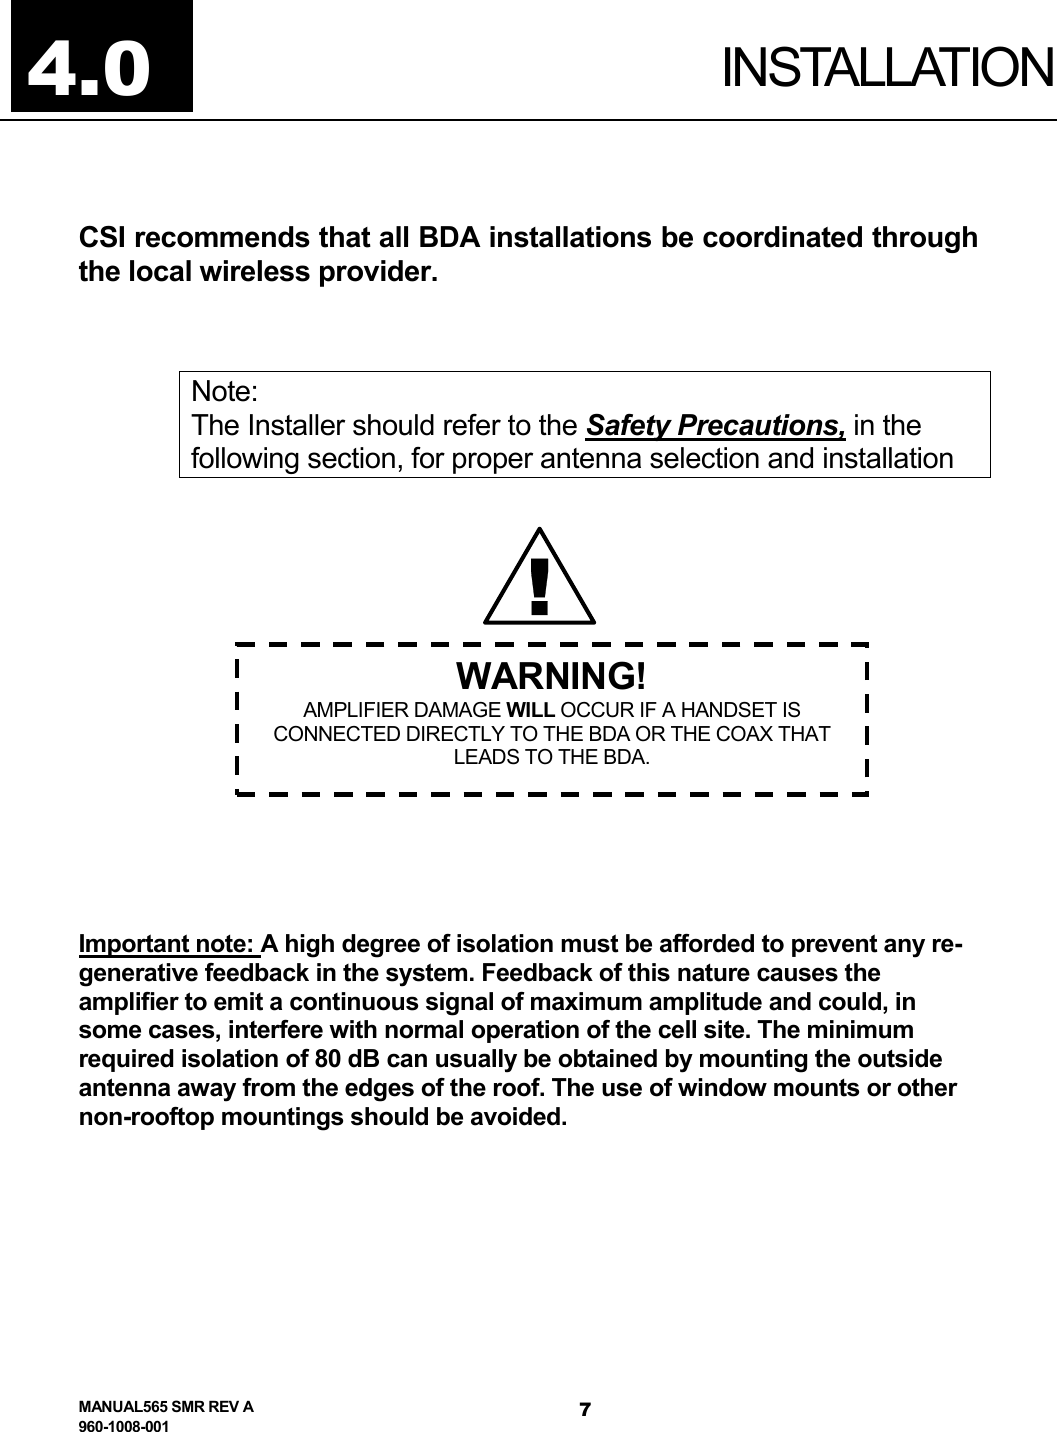  4.0  INSTALLATION CSI recommends that all BDA installations be coordinated through the local wireless provider.  Note: The Installer should refer to the Safety Precautions, in the following section, for proper antenna selection and installation   !WARNING! AMPLIFIER DAMAGE WILL OCCUR IF A HANDSET IS CONNECTED DIRECTLY TO THE BDA OR THE COAX THAT LEADS TO THE BDA.           Important note: A high degree of isolation must be afforded to prevent any re-generative feedback in the system. Feedback of this nature causes the amplifier to emit a continuous signal of maximum amplitude and could, in some cases, interfere with normal operation of the cell site. The minimum required isolation of 80 dB can usually be obtained by mounting the outside antenna away from the edges of the roof. The use of window mounts or other non-rooftop mountings should be avoided.   MANUAL565 SMR REV A 960-1008-001 7